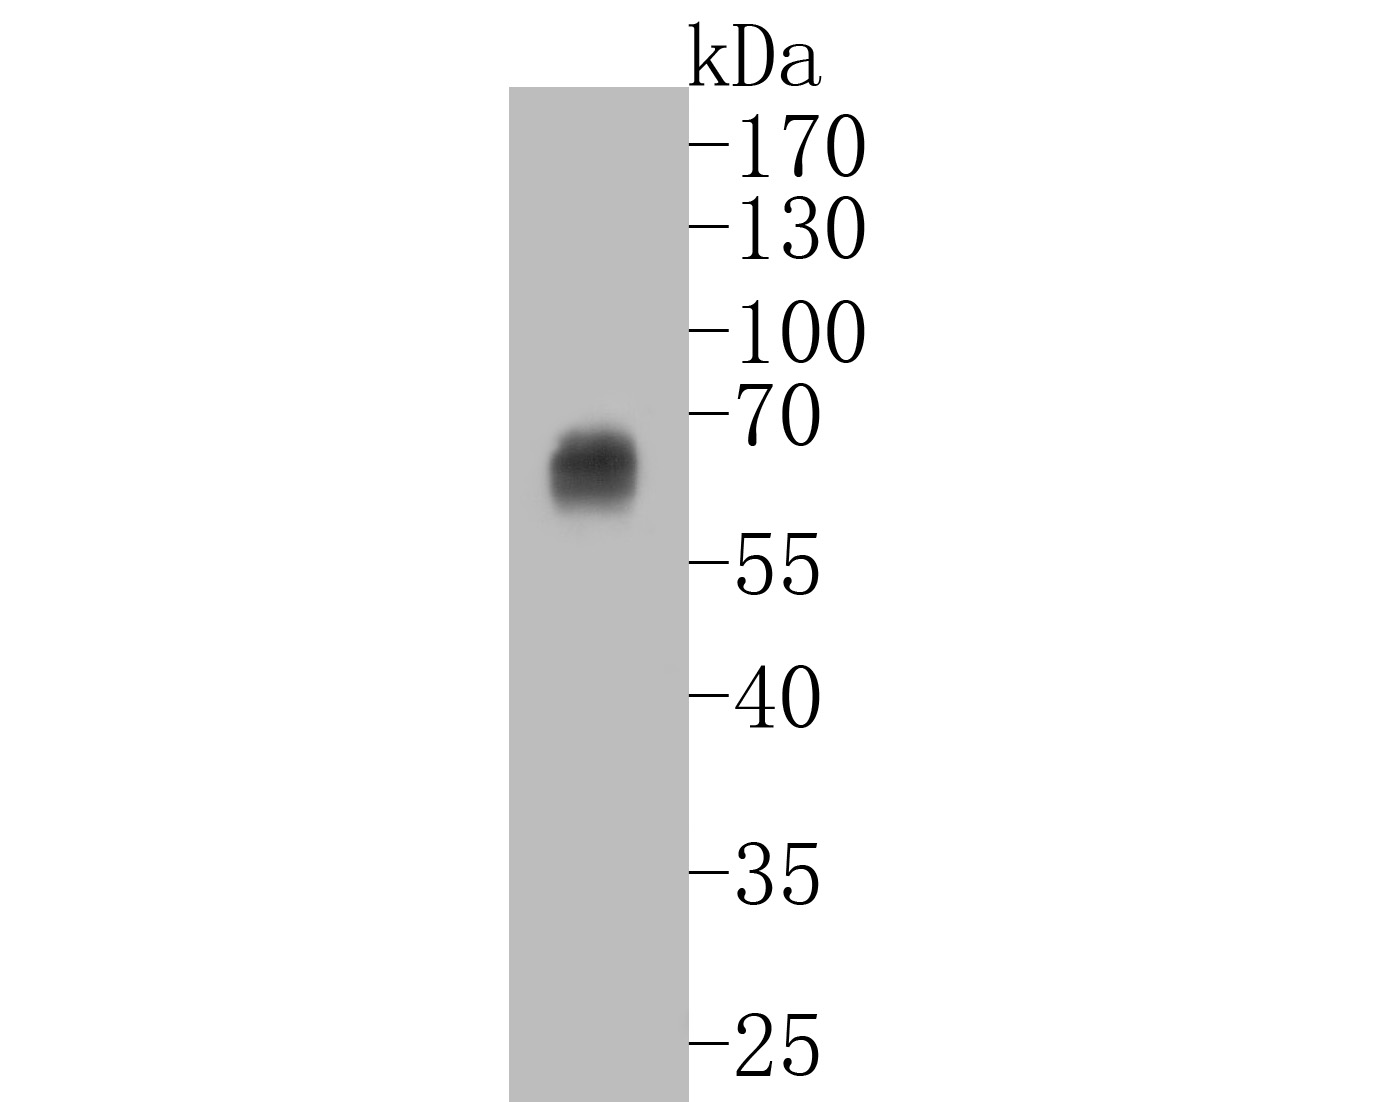 Western blot analysis of Oct-2 on Daudi cell lysates. Proteins were transferred to a PVDF membrane and blocked with 5% BSA in PBS for 1 hour at room temperature. The primary antibody (ET7111-39, 1/500) was used in 5% BSA at room temperature for 2 hours. Goat Anti-Rabbit IgG - HRP Secondary Antibody (HA1001) at 1:5,000 dilution was used for 1 hour at room temperature.